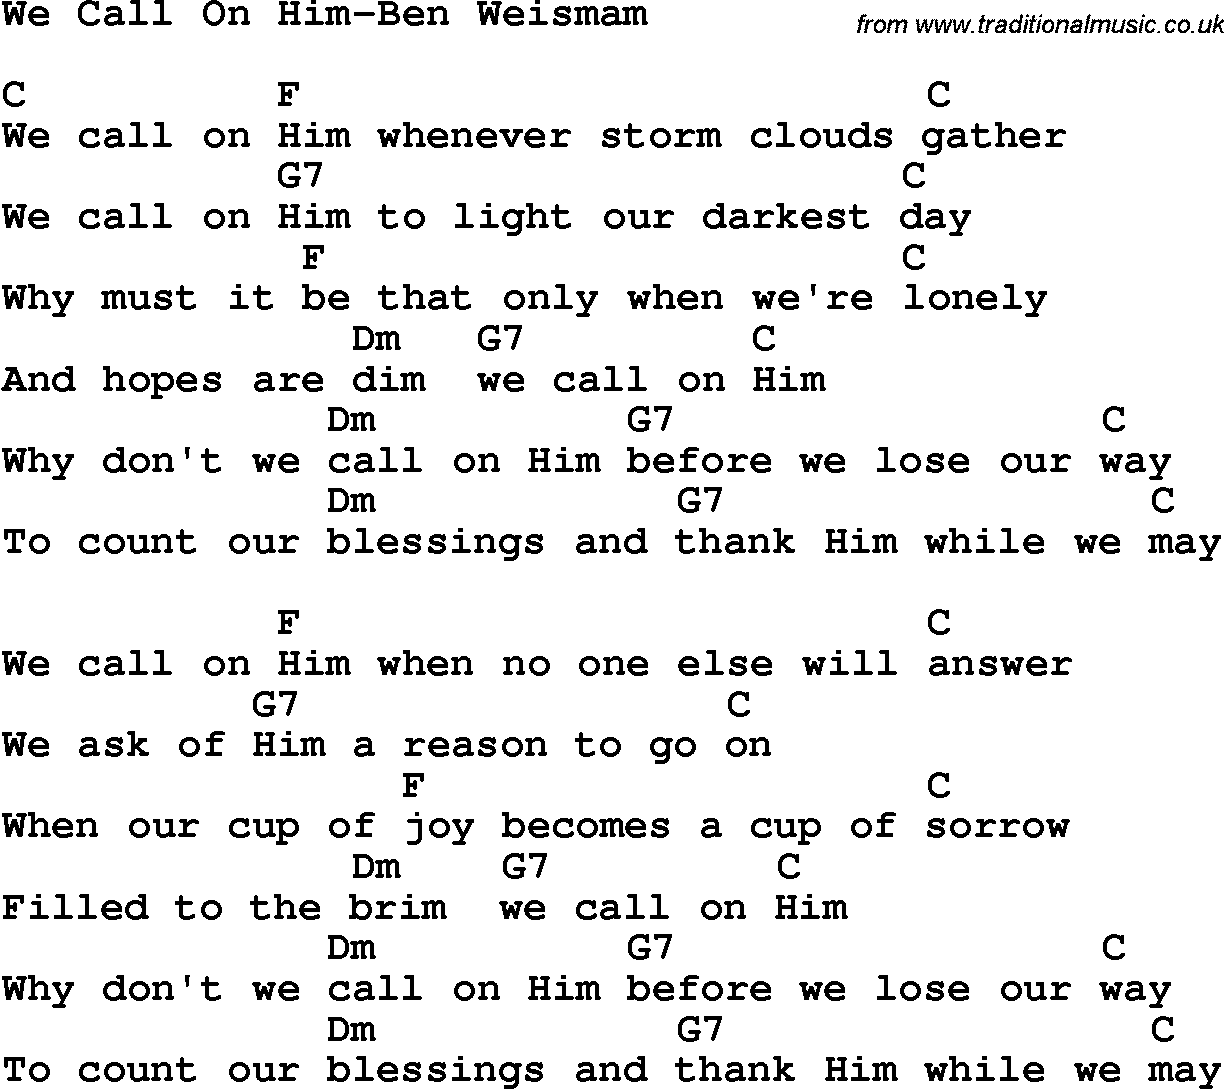 Country, Southern and Bluegrass Gospel Song We Call On Him-Ben Weismam lyrics and chords